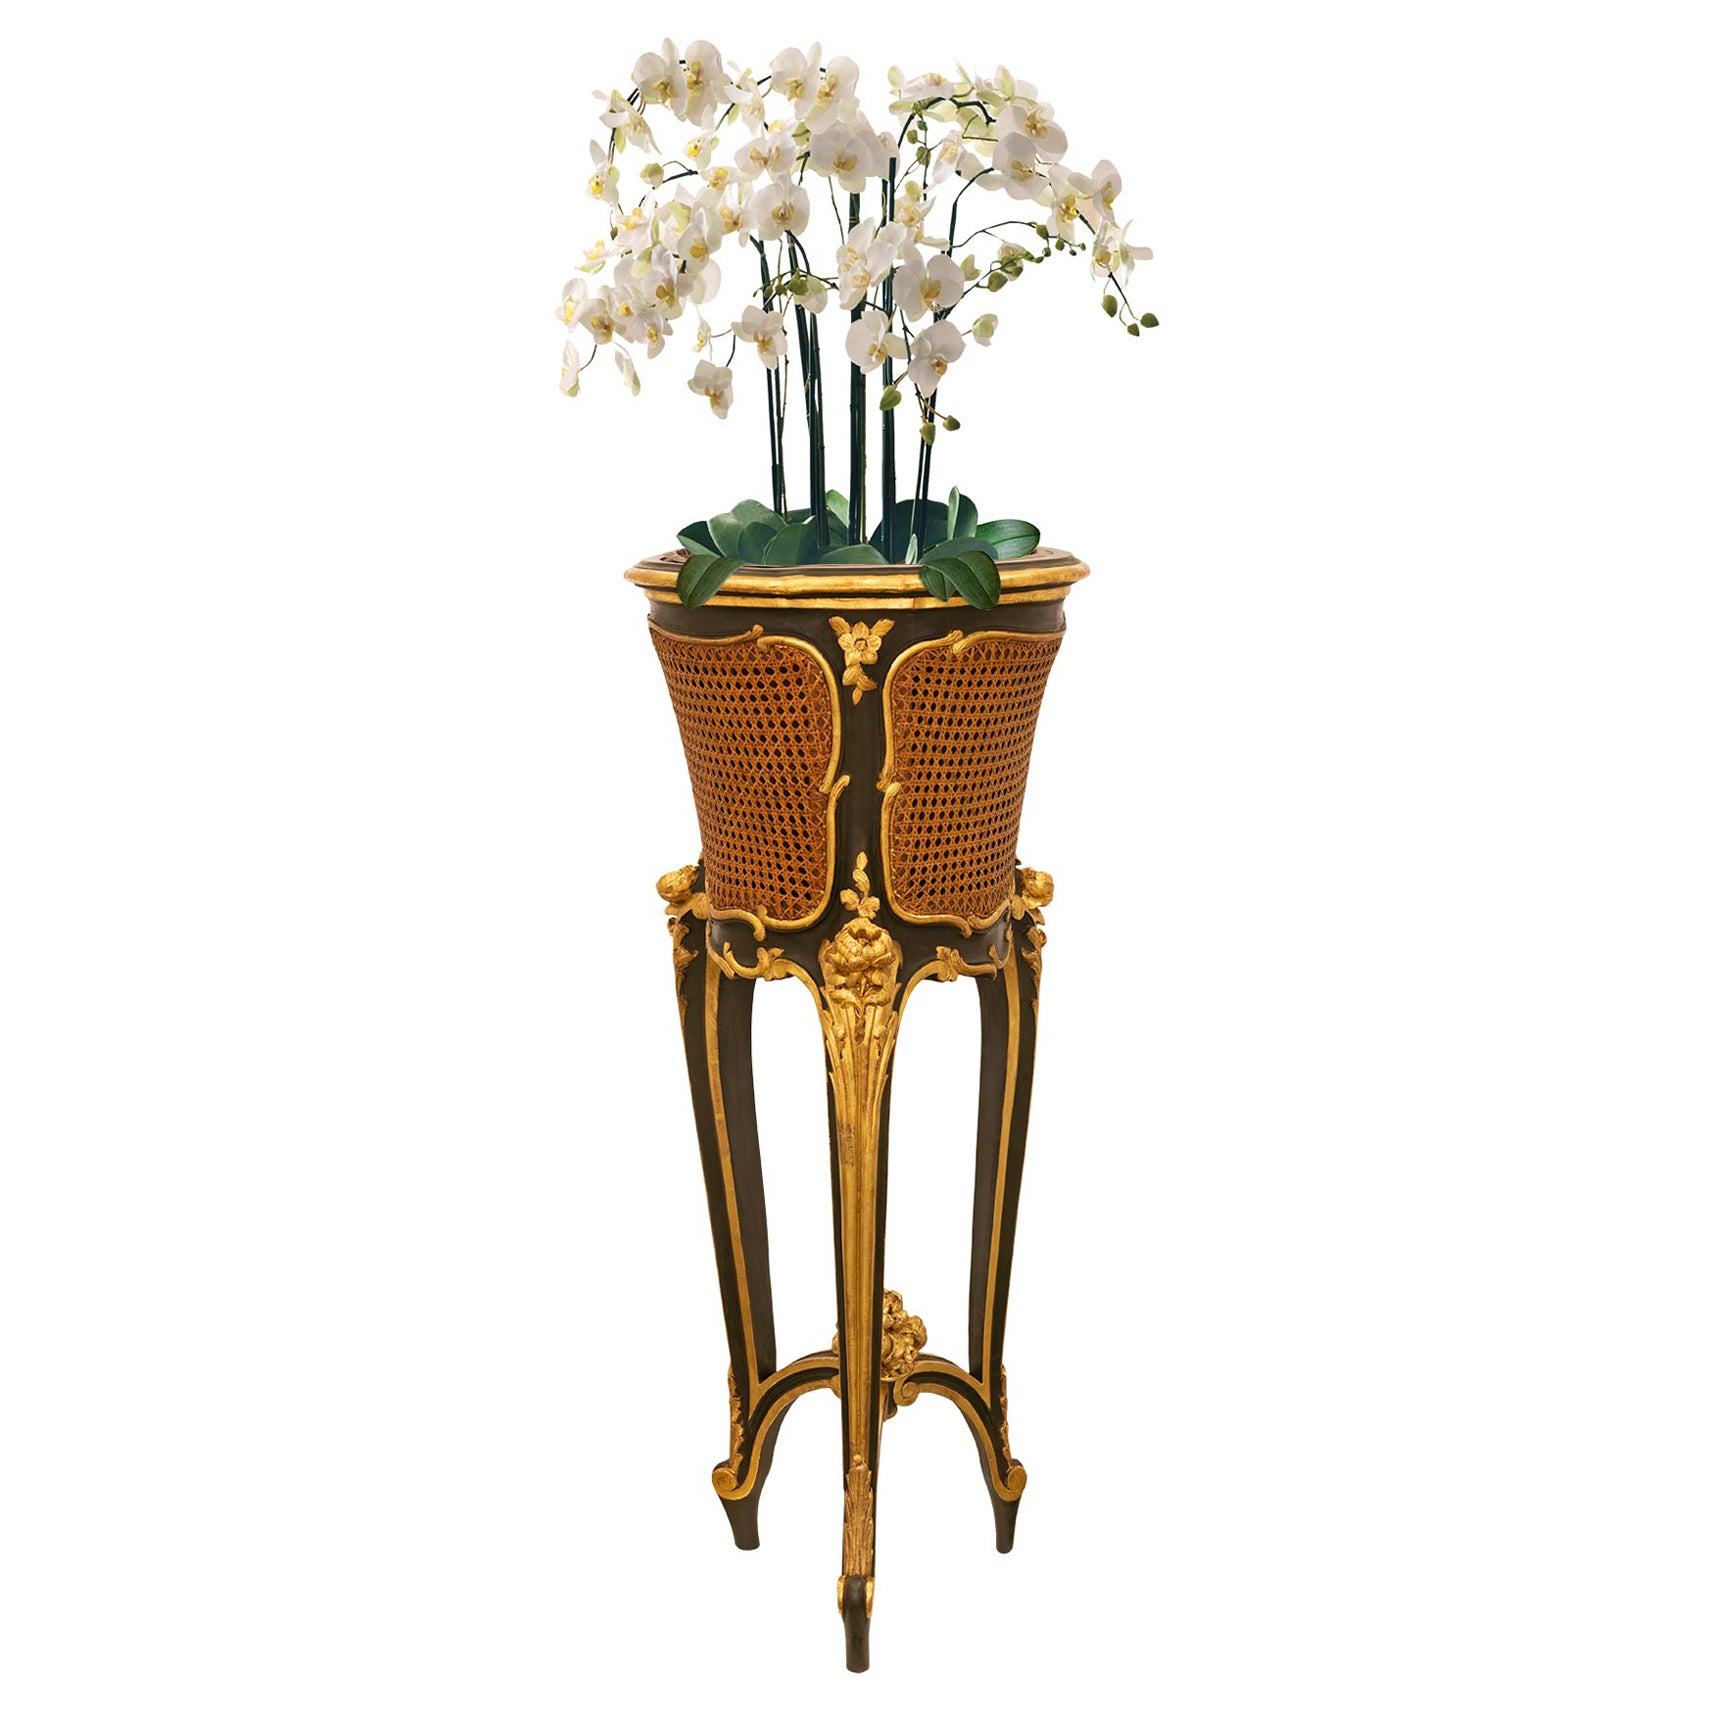 French, 19th Century, Belle Époque Period Polychrome and Giltwood Planter For Sale